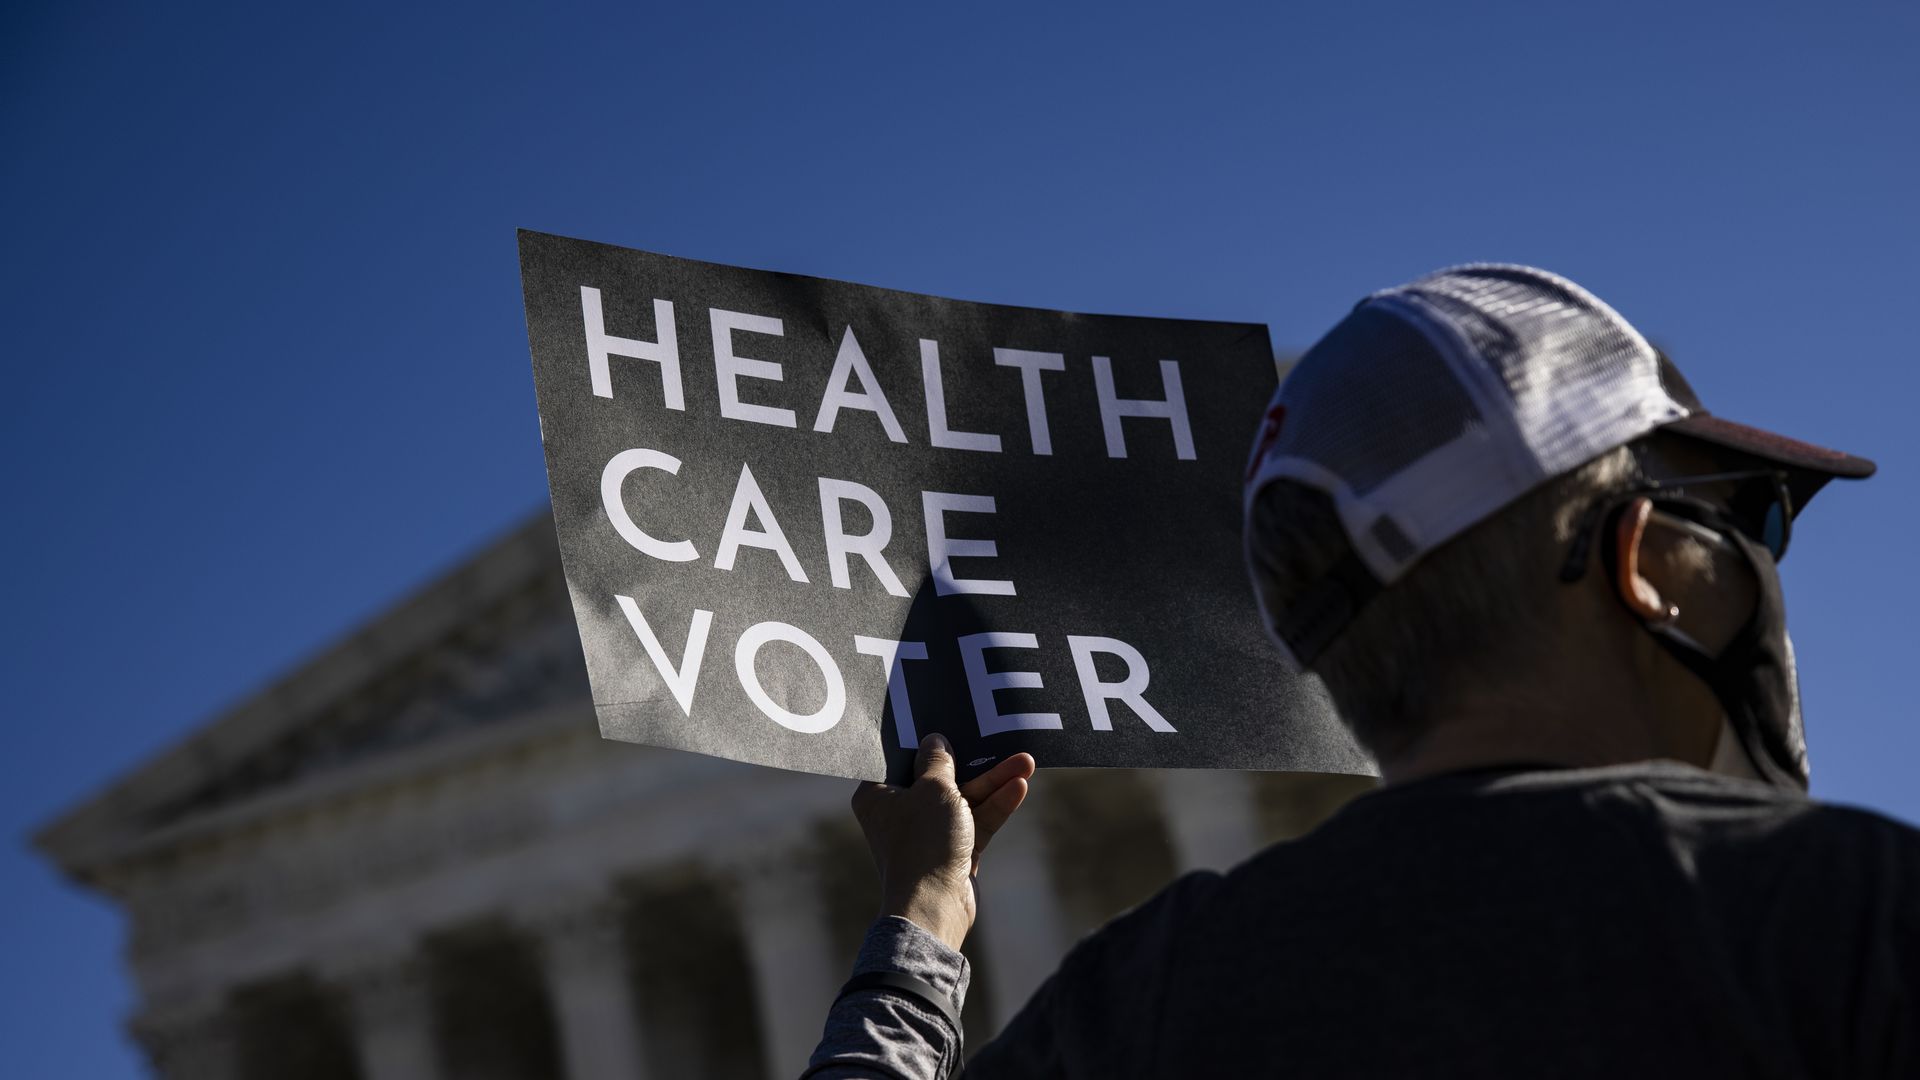 Picture of a sign that says "health care voter"